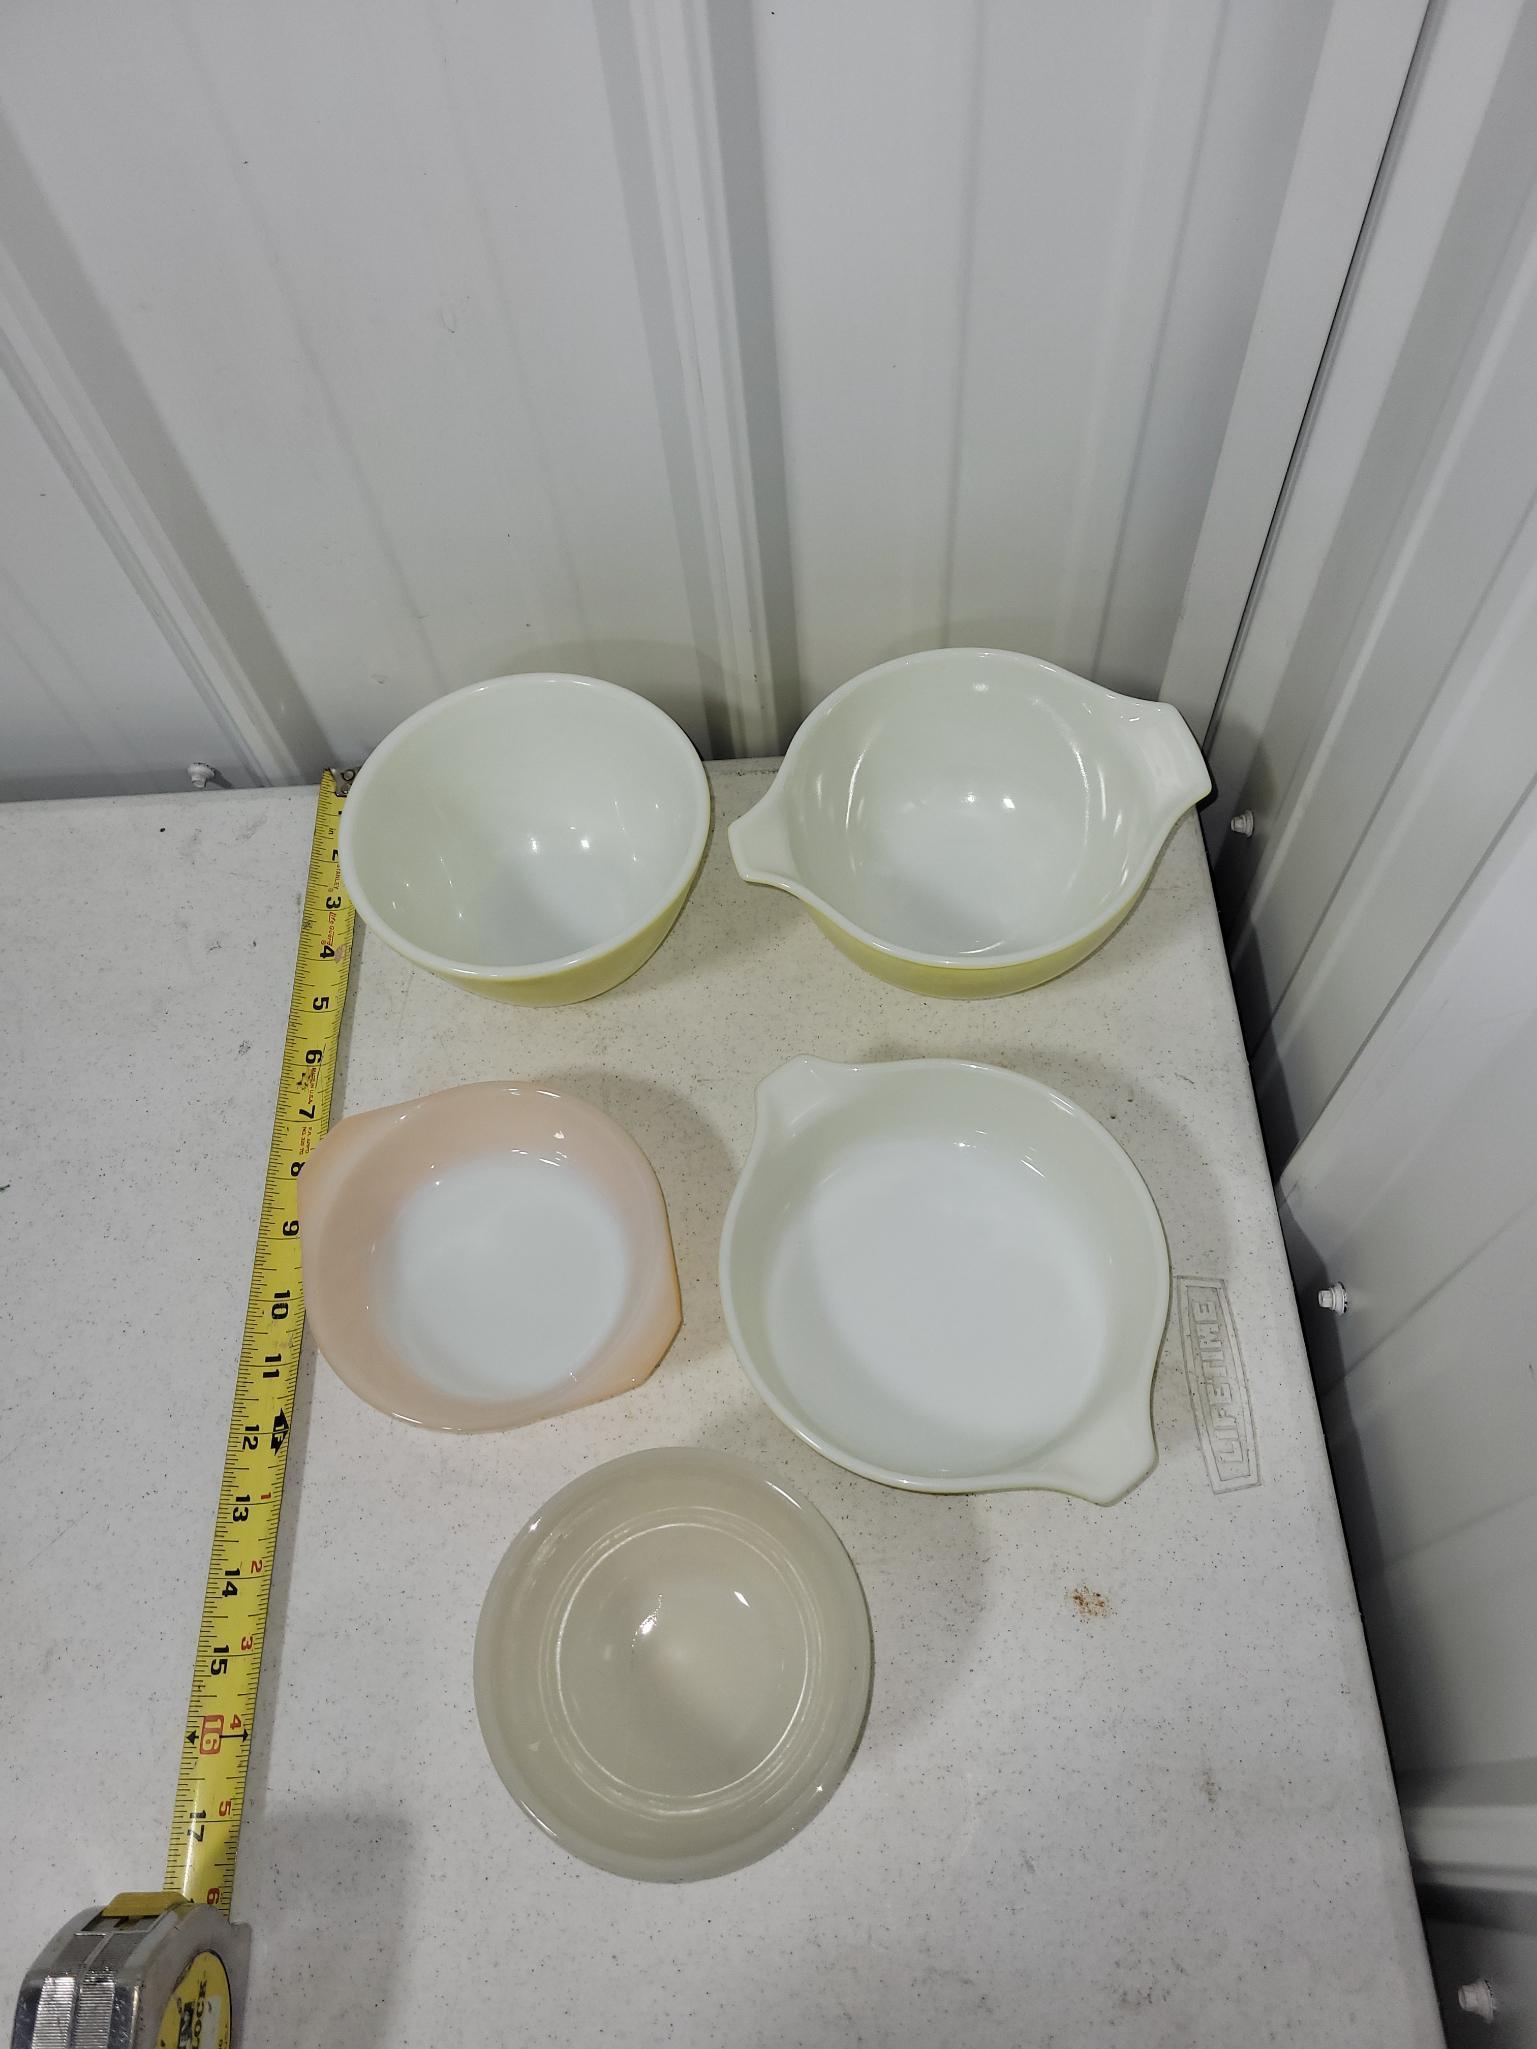 3 small yellow Pyrex bowls and 2 fire king bowls